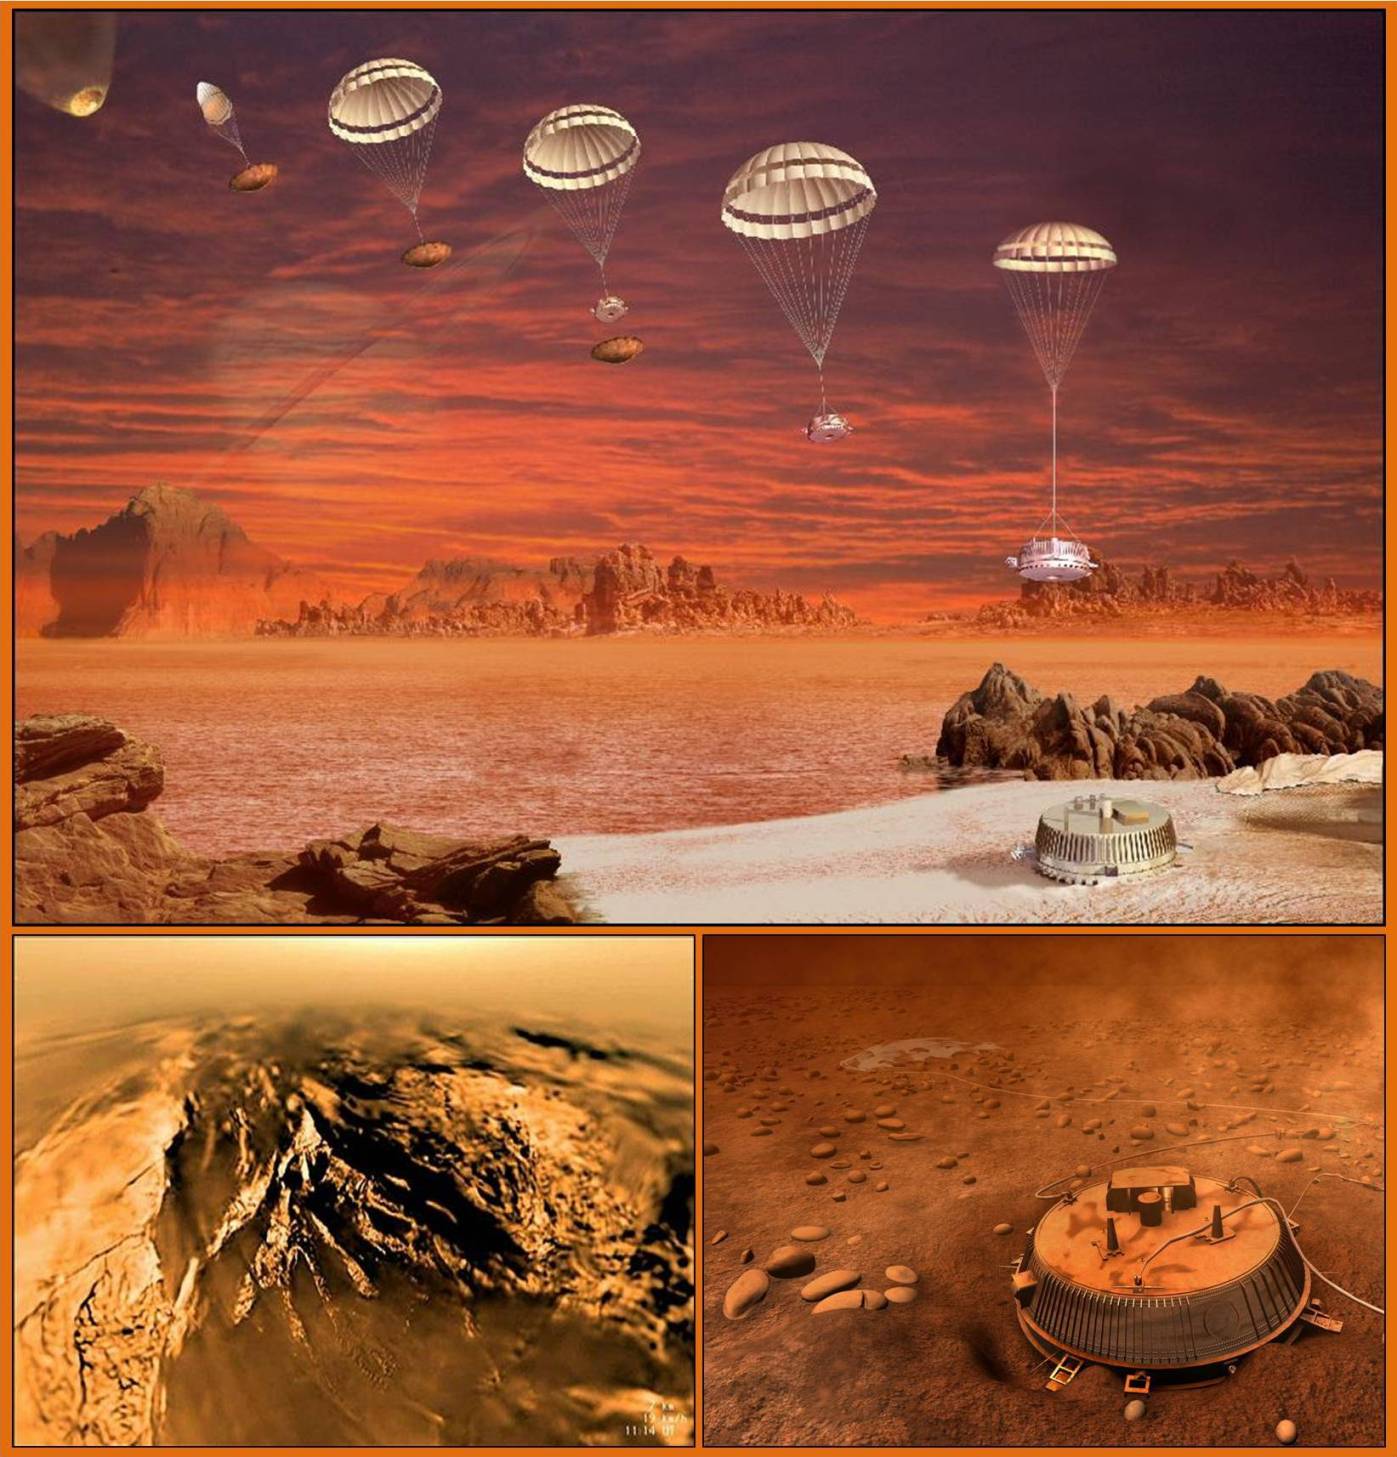 The Huygens probe arrives at Titan in 2005